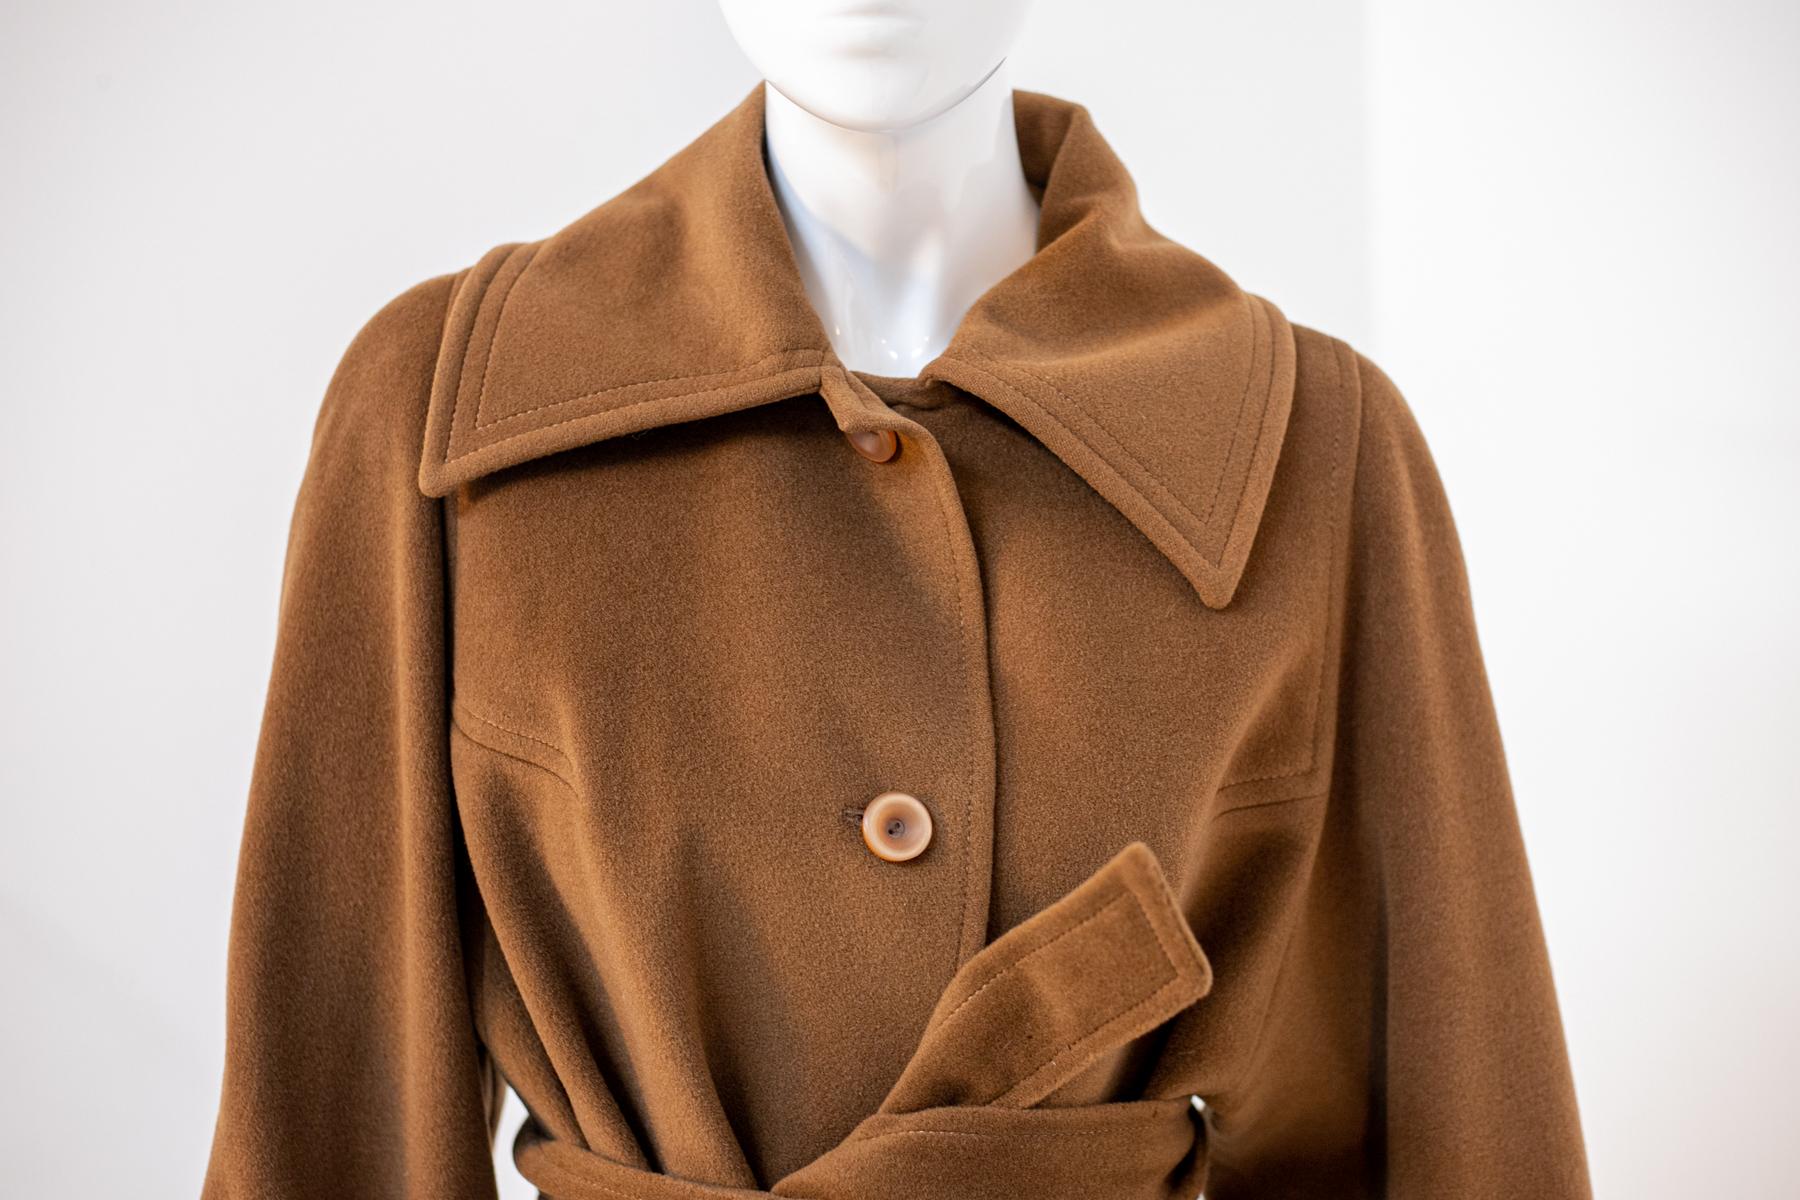 Elegant wool coat designed in the 1980s, made in Italy.
The coat is totally made of warm light brown wool, camel color. Its length reaches the knees and has long sleeves. The sleeves are big enough to wear heavy sweaters, but with light clothes it